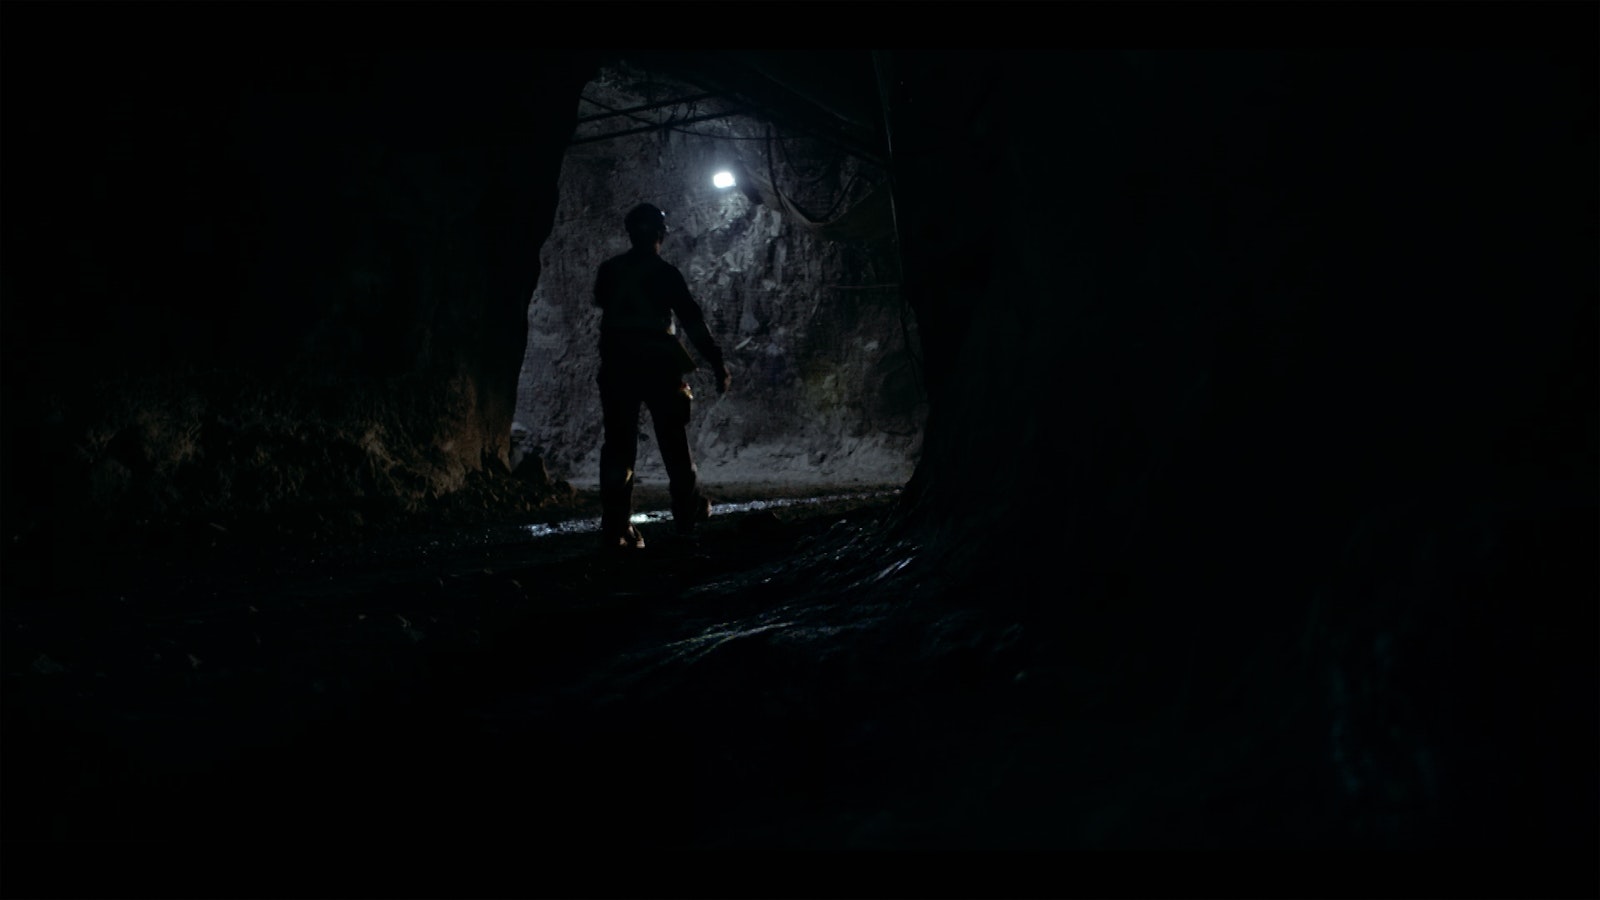 A mineworker stands in an underground tunnel surrounded by grey rock. A single white light shines in the tunnel.